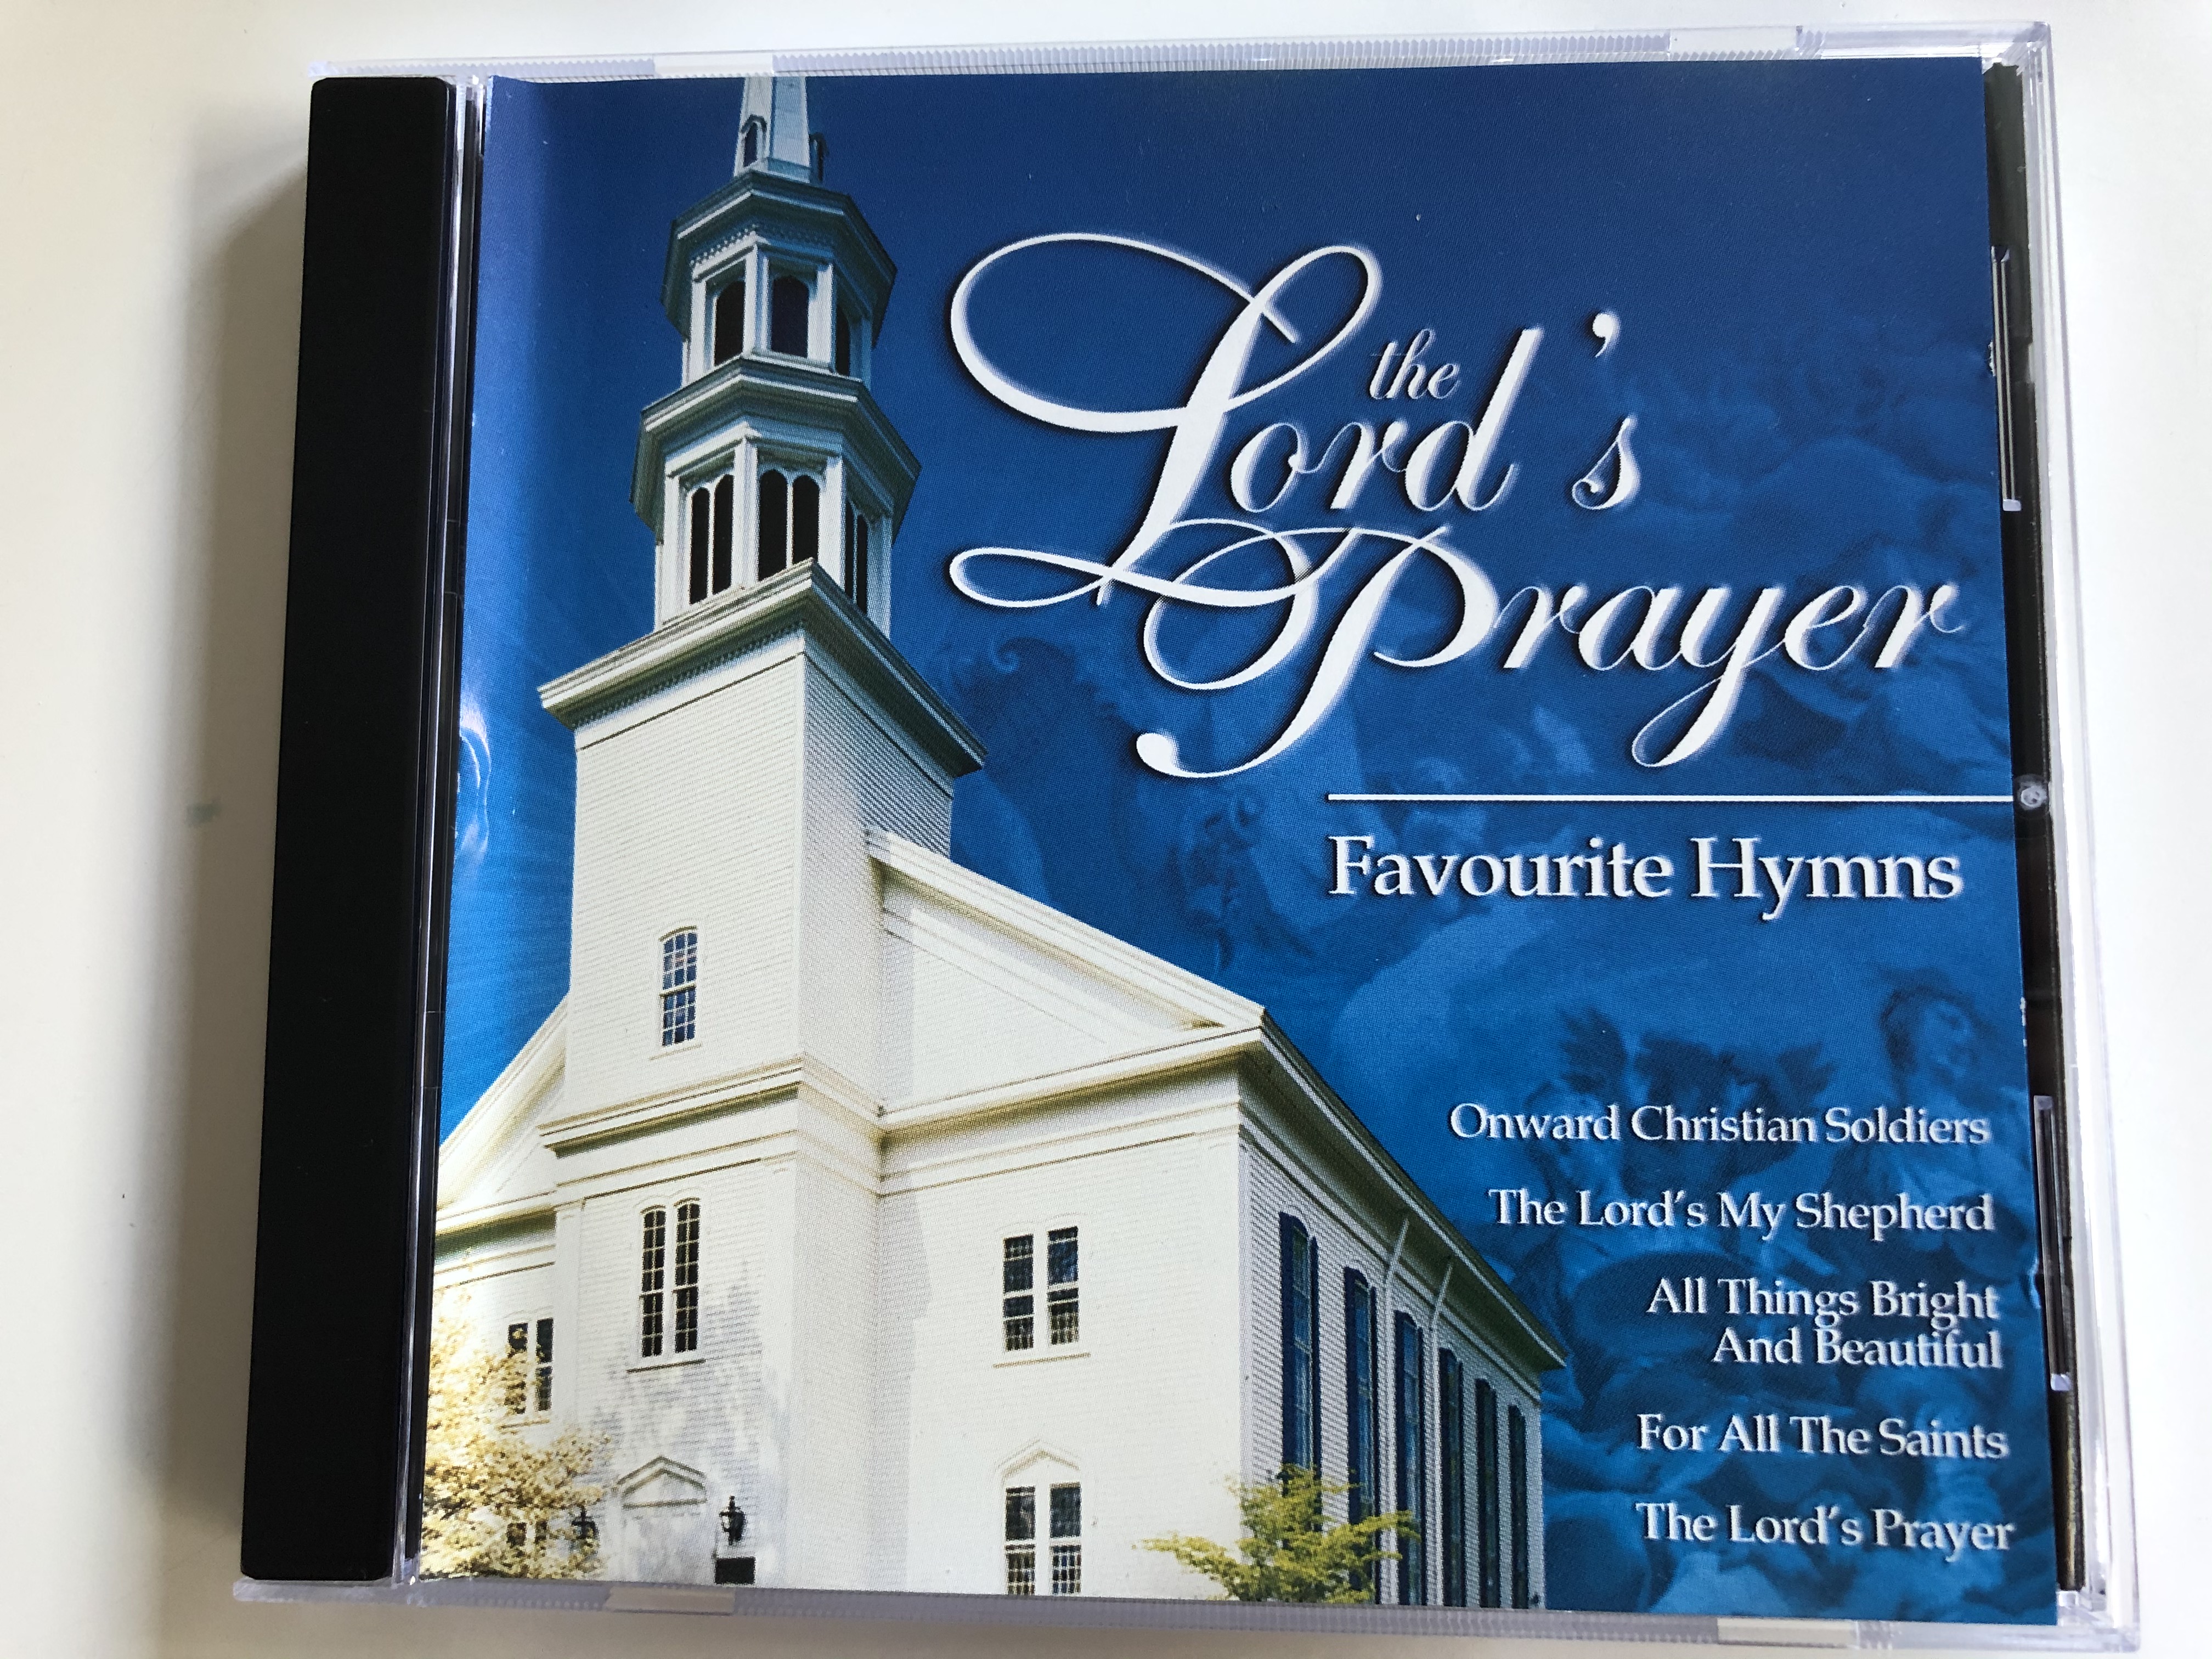 the-lord-s-prayer-favourite-hymns-onward-christian-soldiers-the-lord-s-my-shepherd-all-things-bright-and-beautiful-for-all-the-saints-the-lord-s-prayer-millenium-gold-audio-cd-2002-mg212-1-.jpg